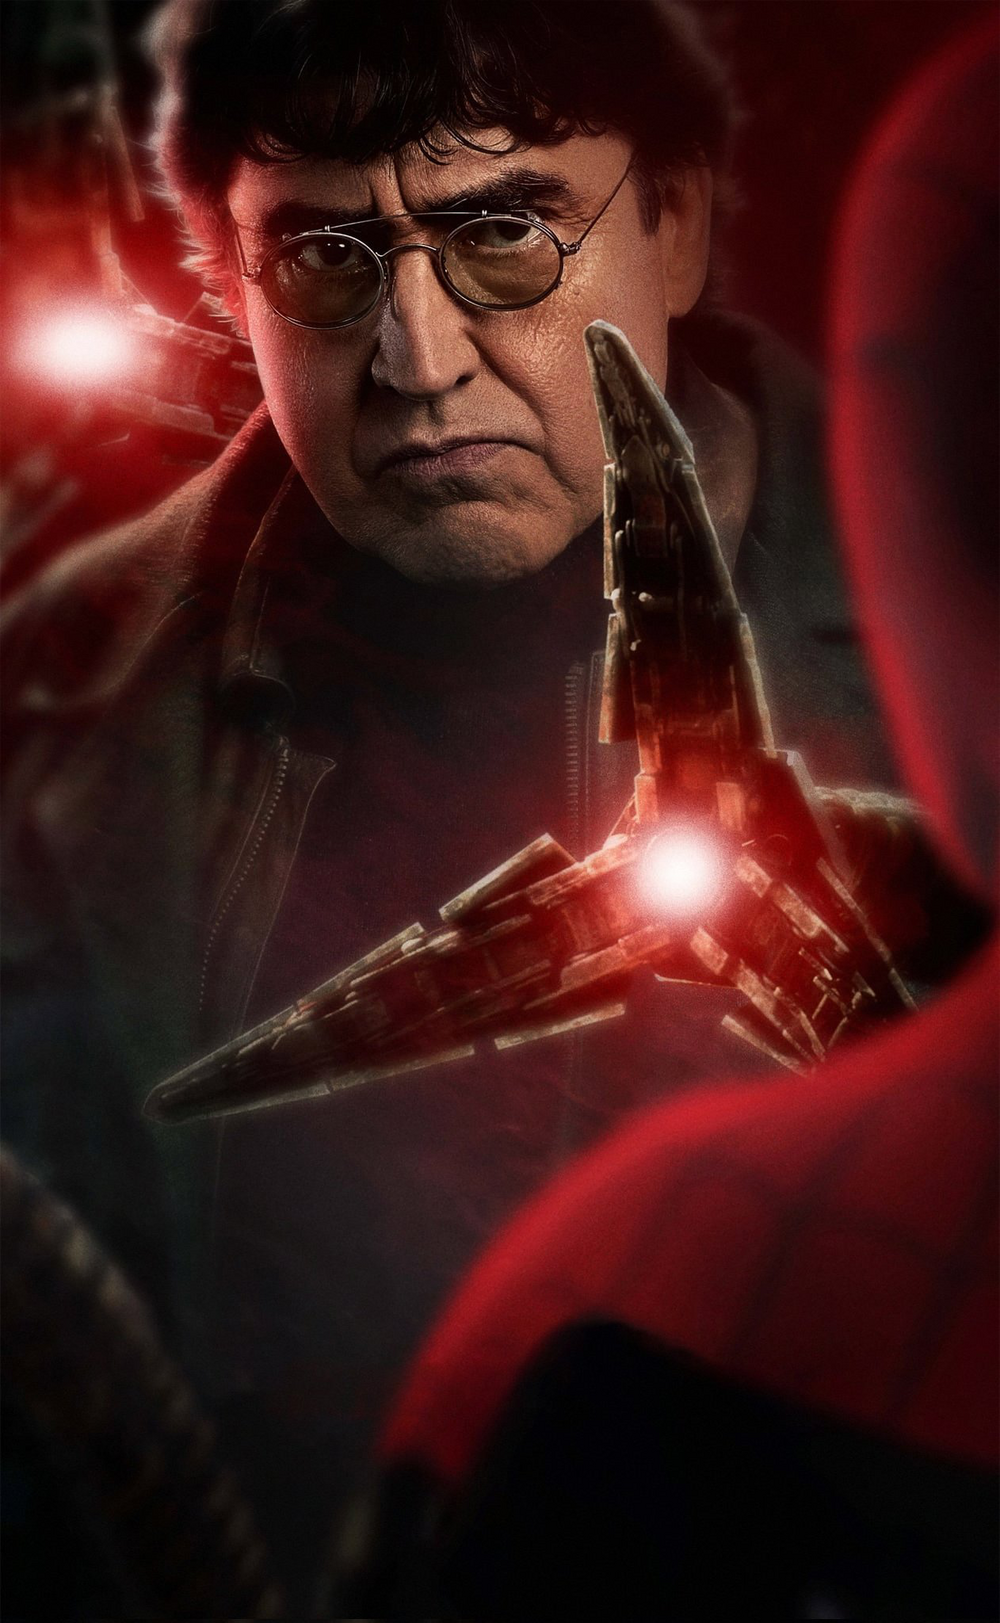 Alfred Molina Said Tentacles 'Do All The Work' In The New 'Spider-Man